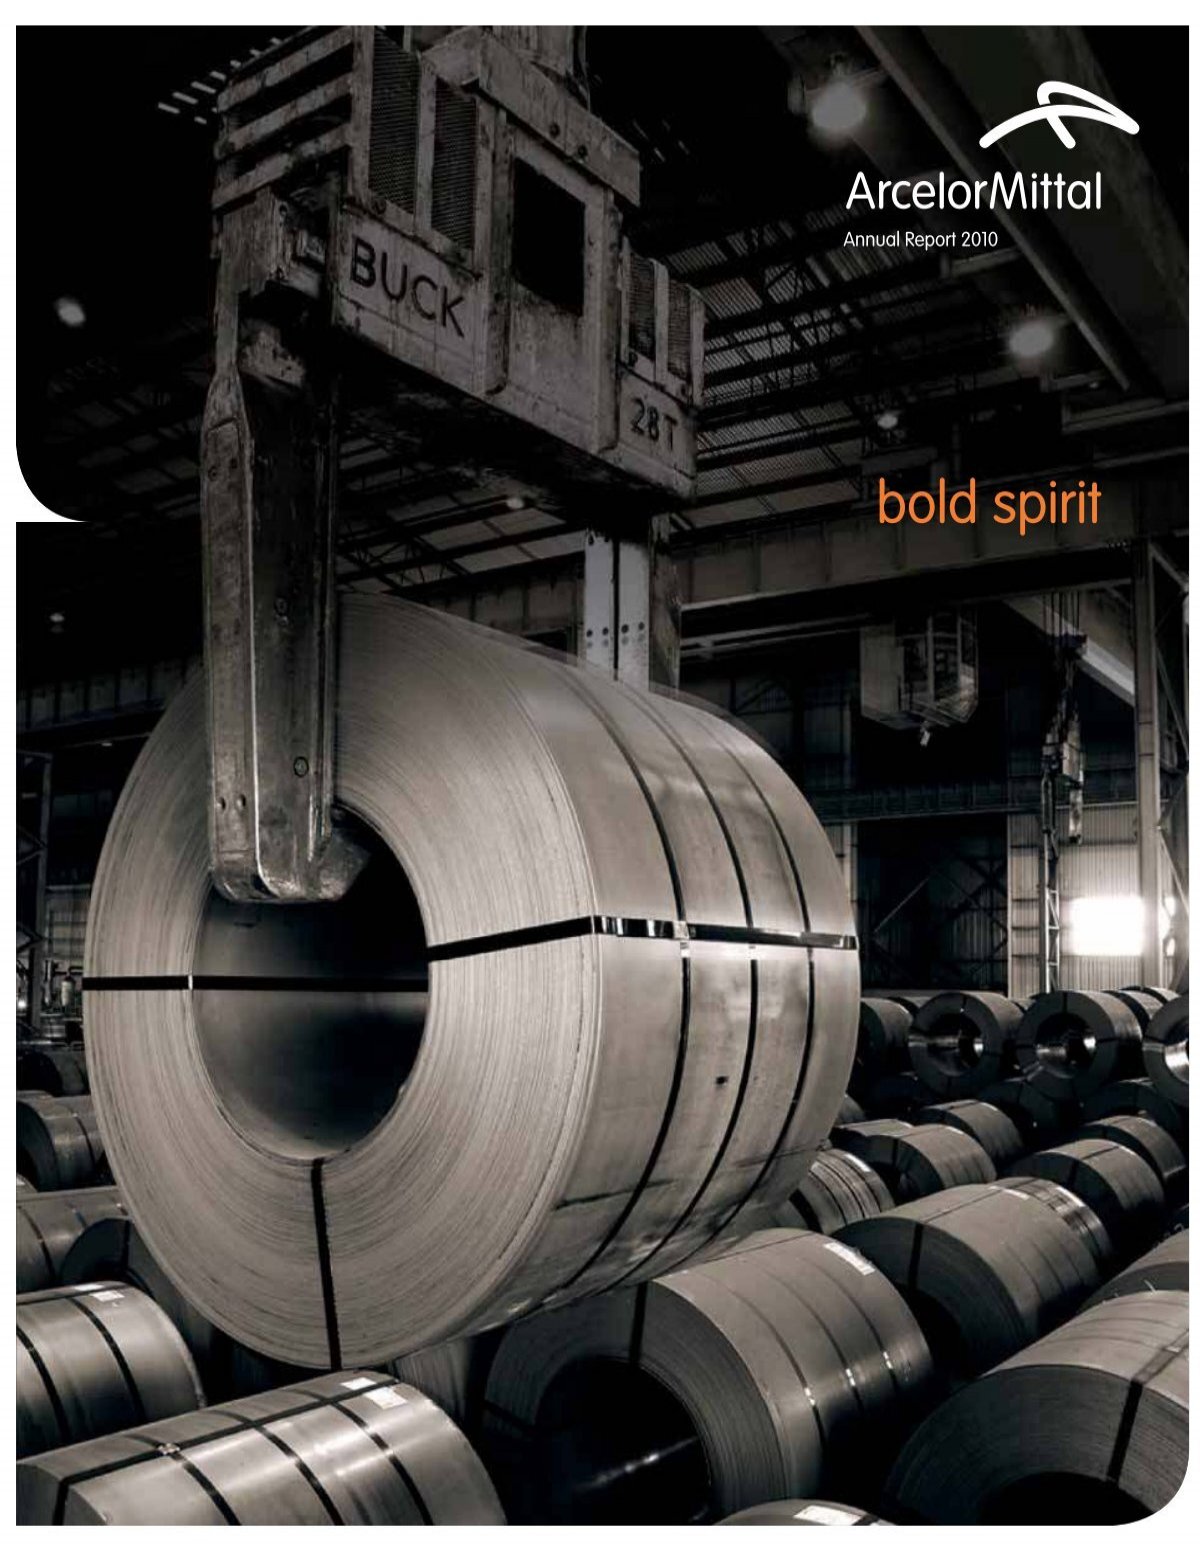 ArcelorMittal reports over 50 pc fall in net income in Apr-Jun